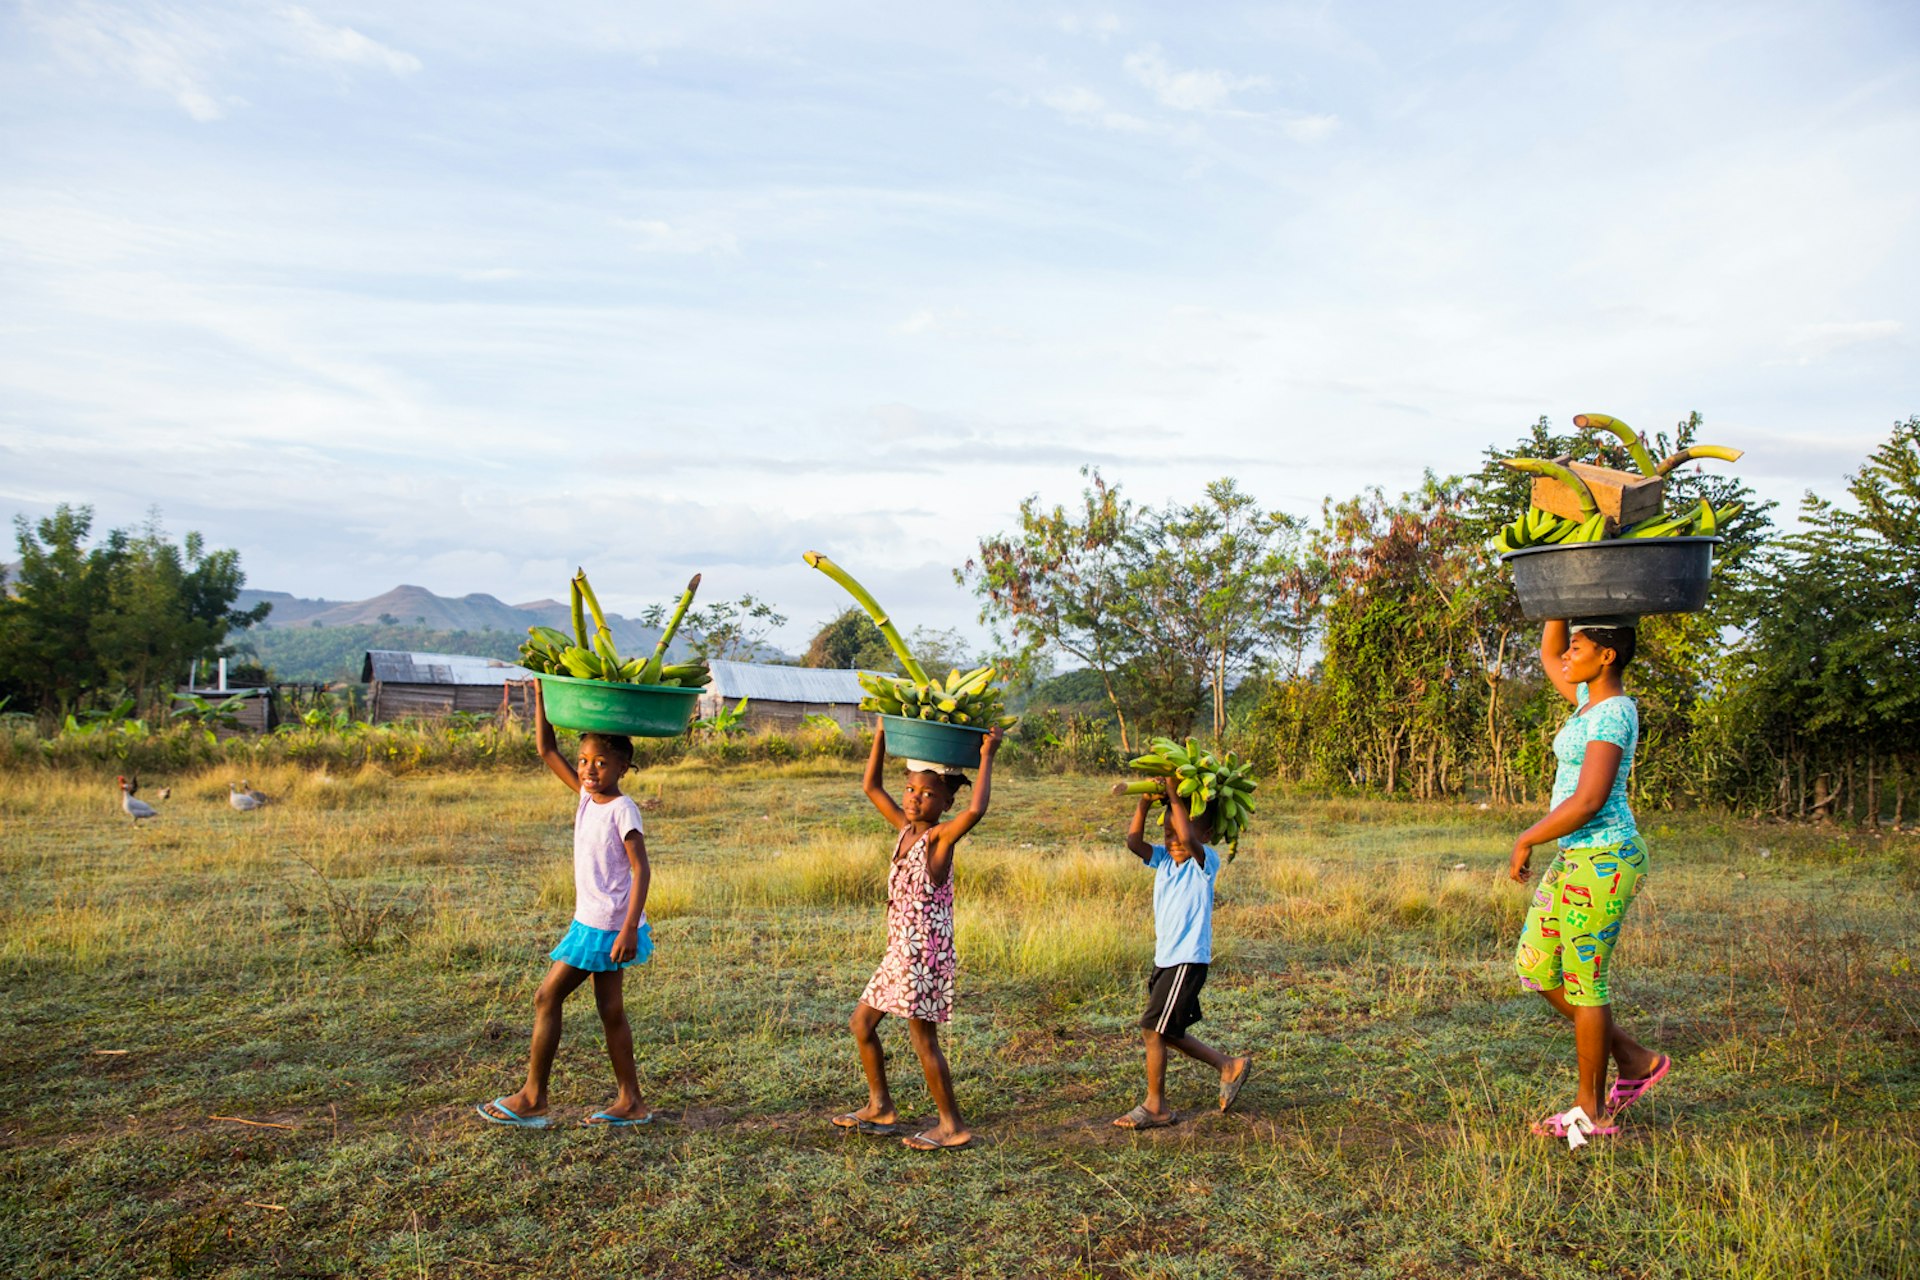 A family of banana farmers walk at sunrise in Central Plateau.